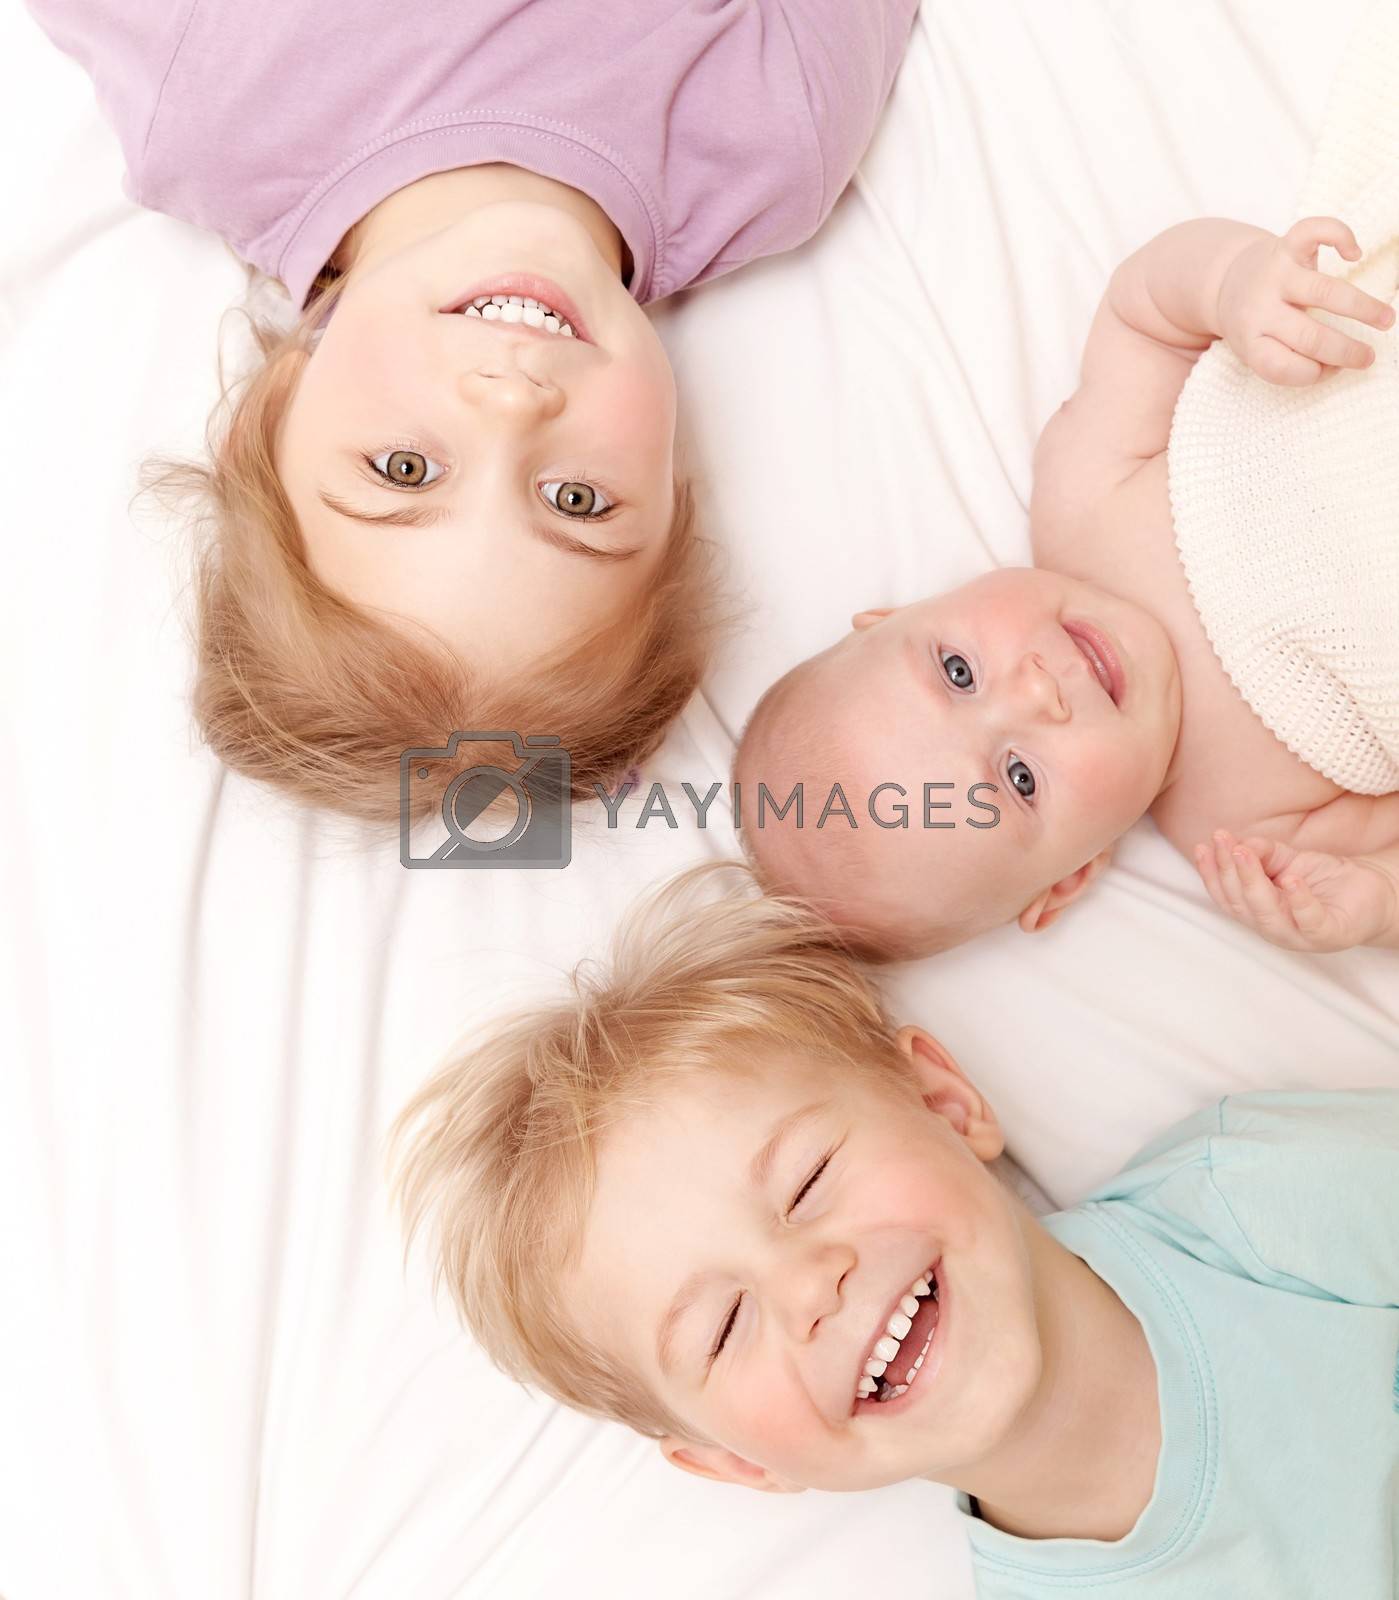 Royalty free image of Happy children at home by Anna_Omelchenko